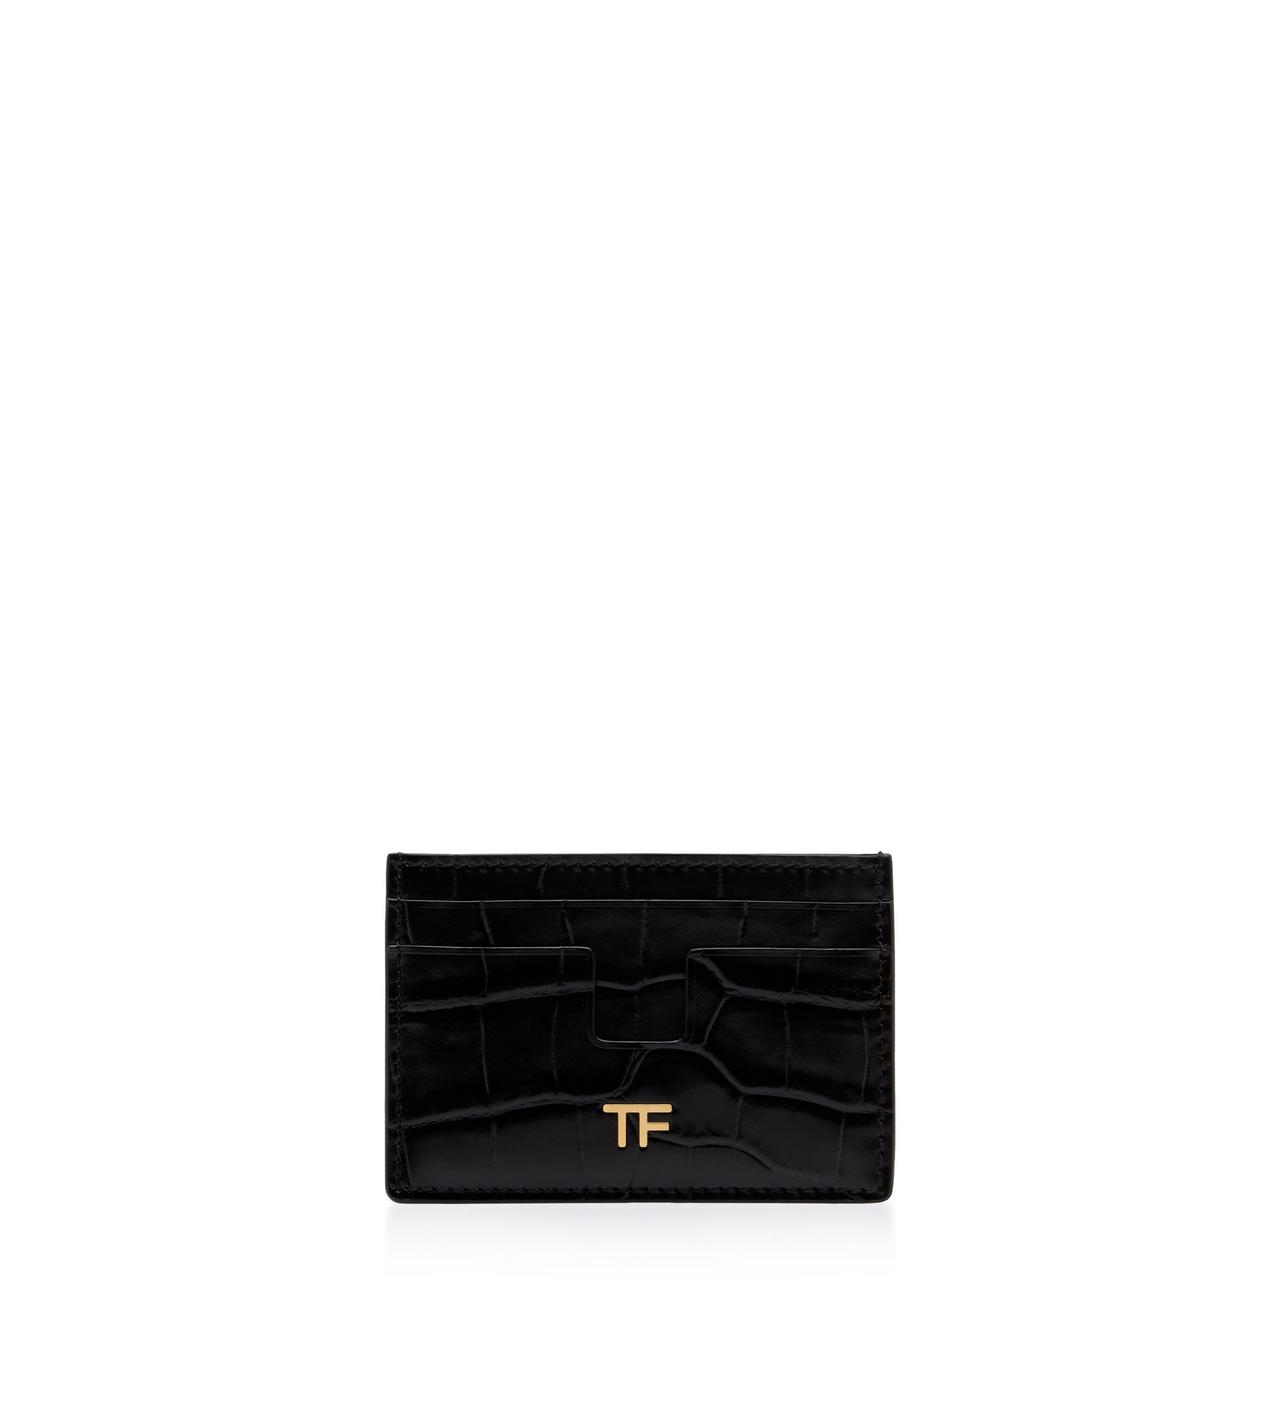 SHINY STAMPED CROCODILE LEATHER CLASSIC TF CARD HOLDER image number 0